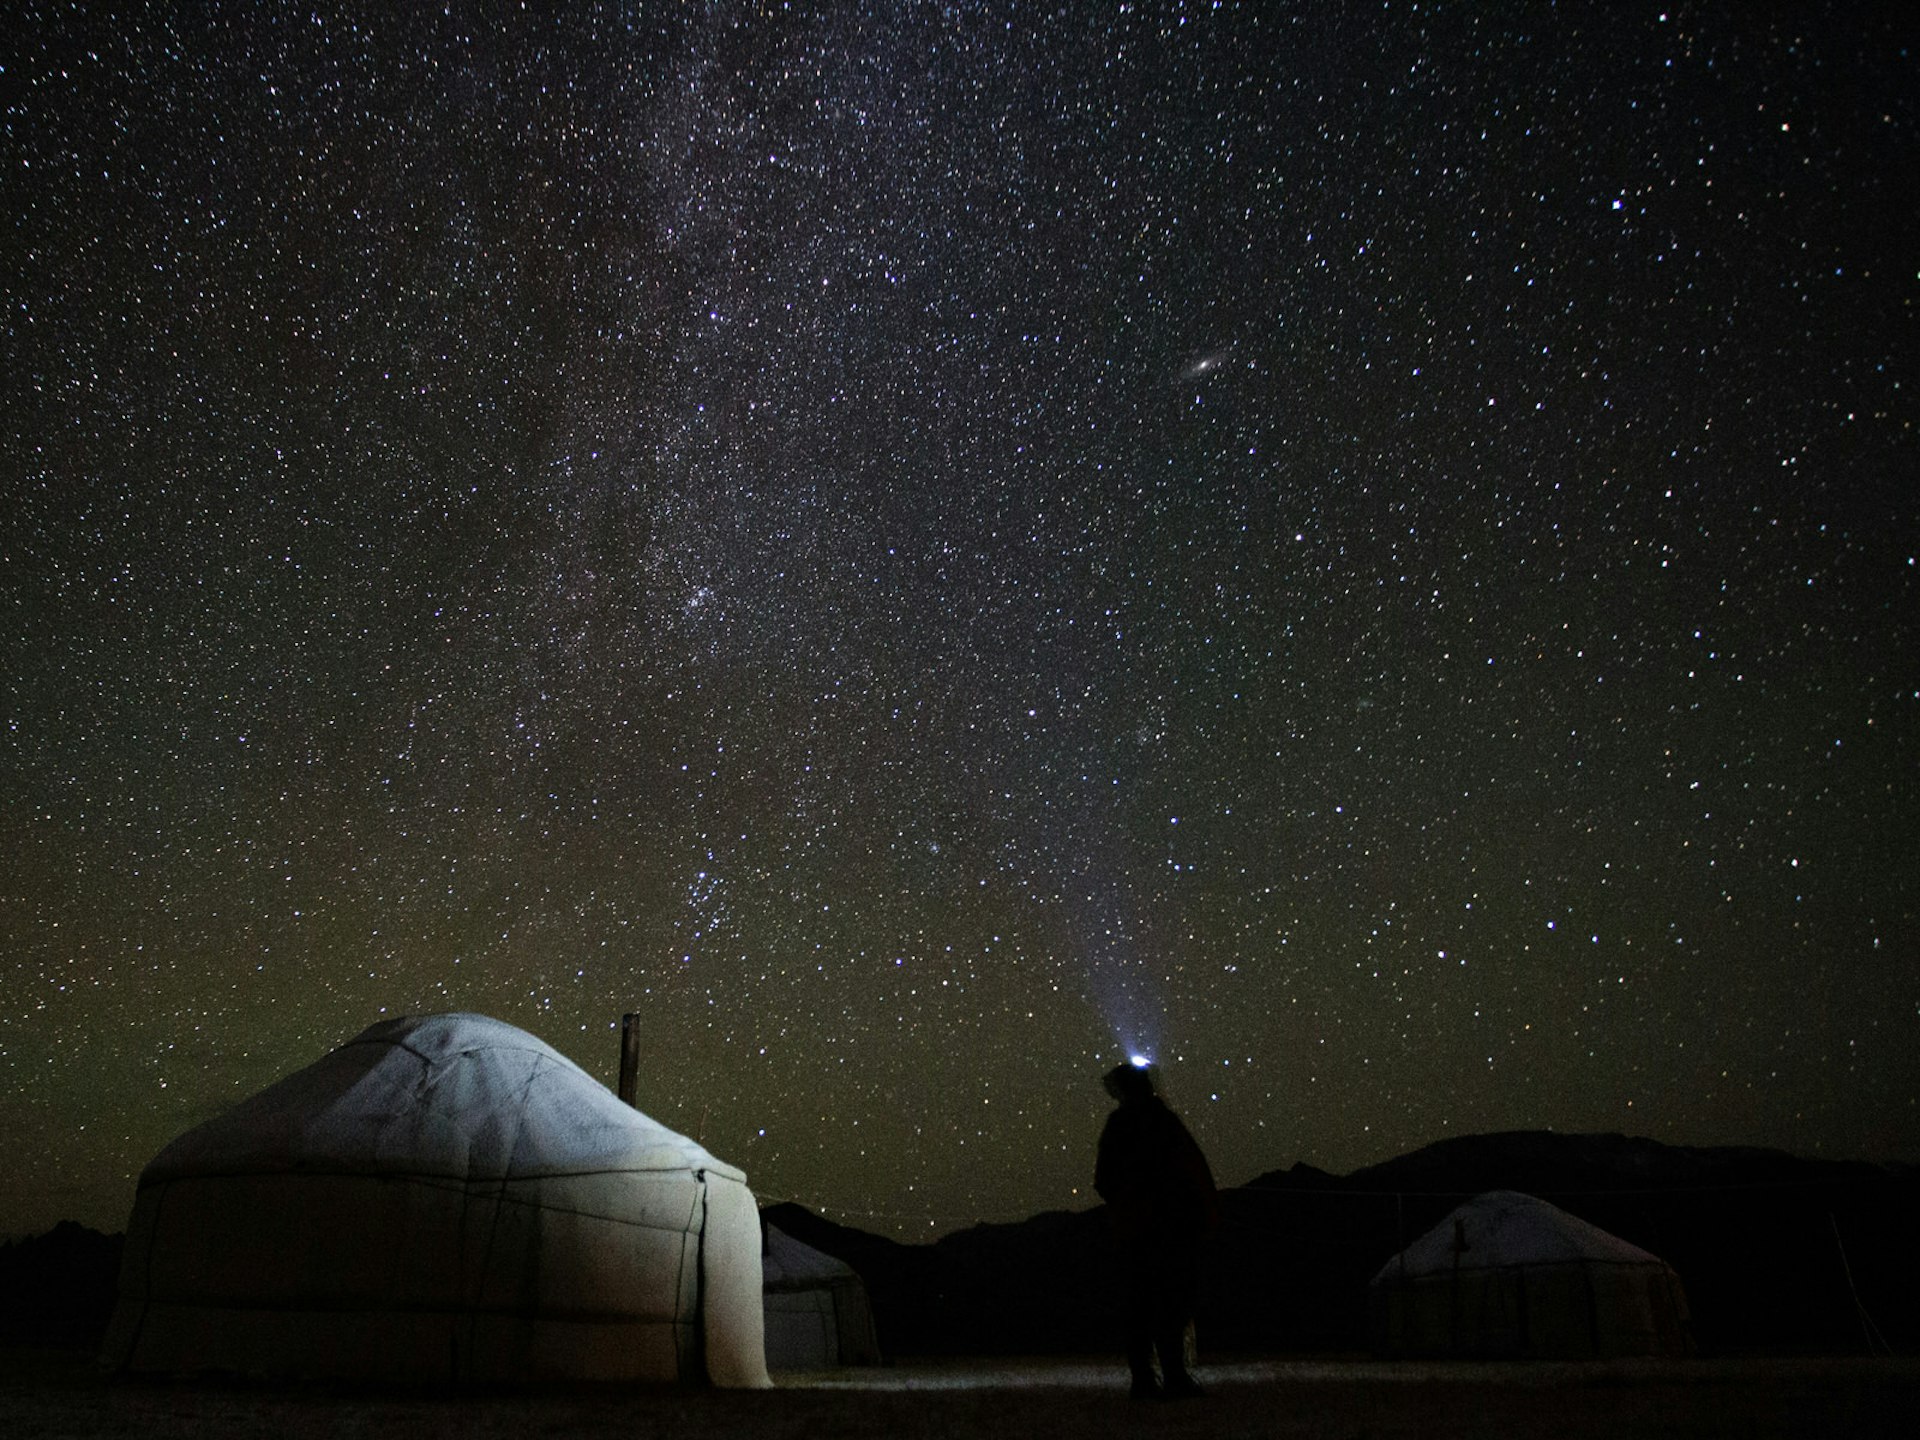 Night sky full of stars. In front, a semi-illuminated yurt tent and a person standing looking upwards with a head torch glowing. © Stephen Lioy / Lonely Planet